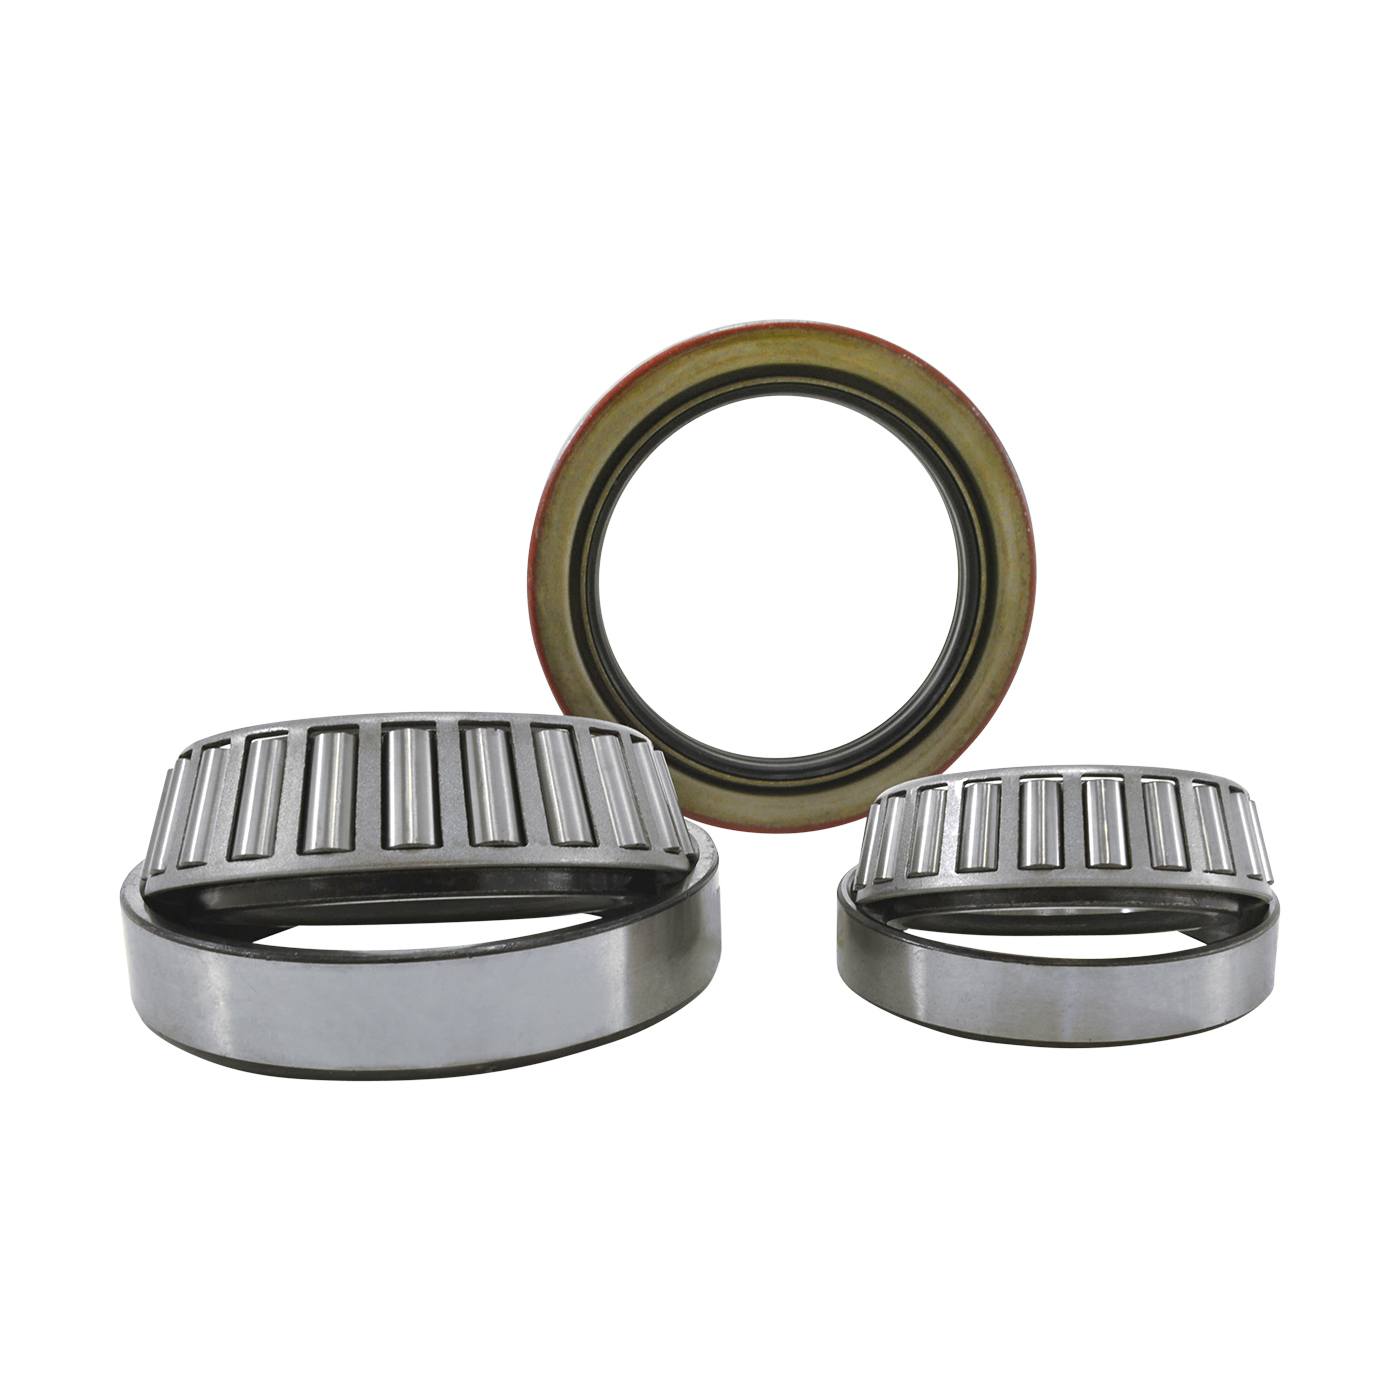 Yukon Rear Axle Bearing and Seal Kit for Ford 